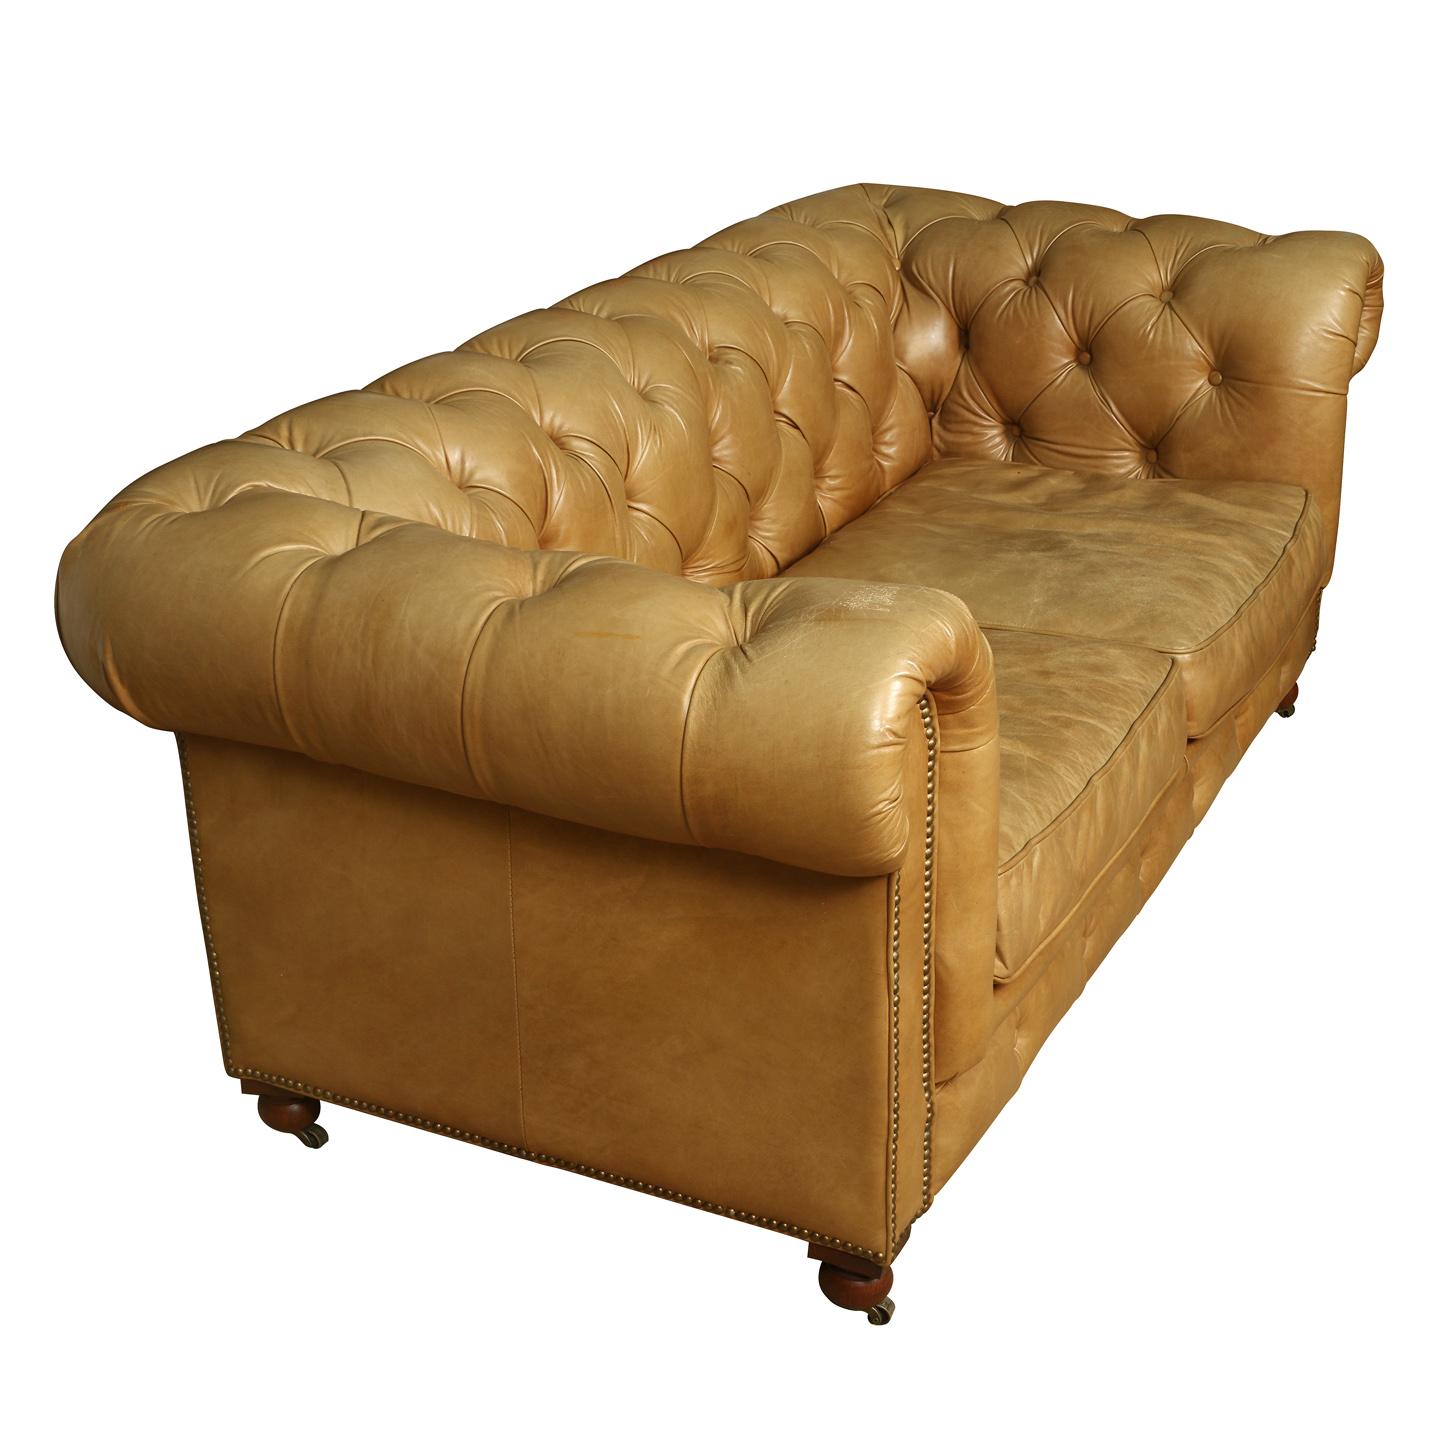 Vintage leather tufted Chesterfield loveseat.